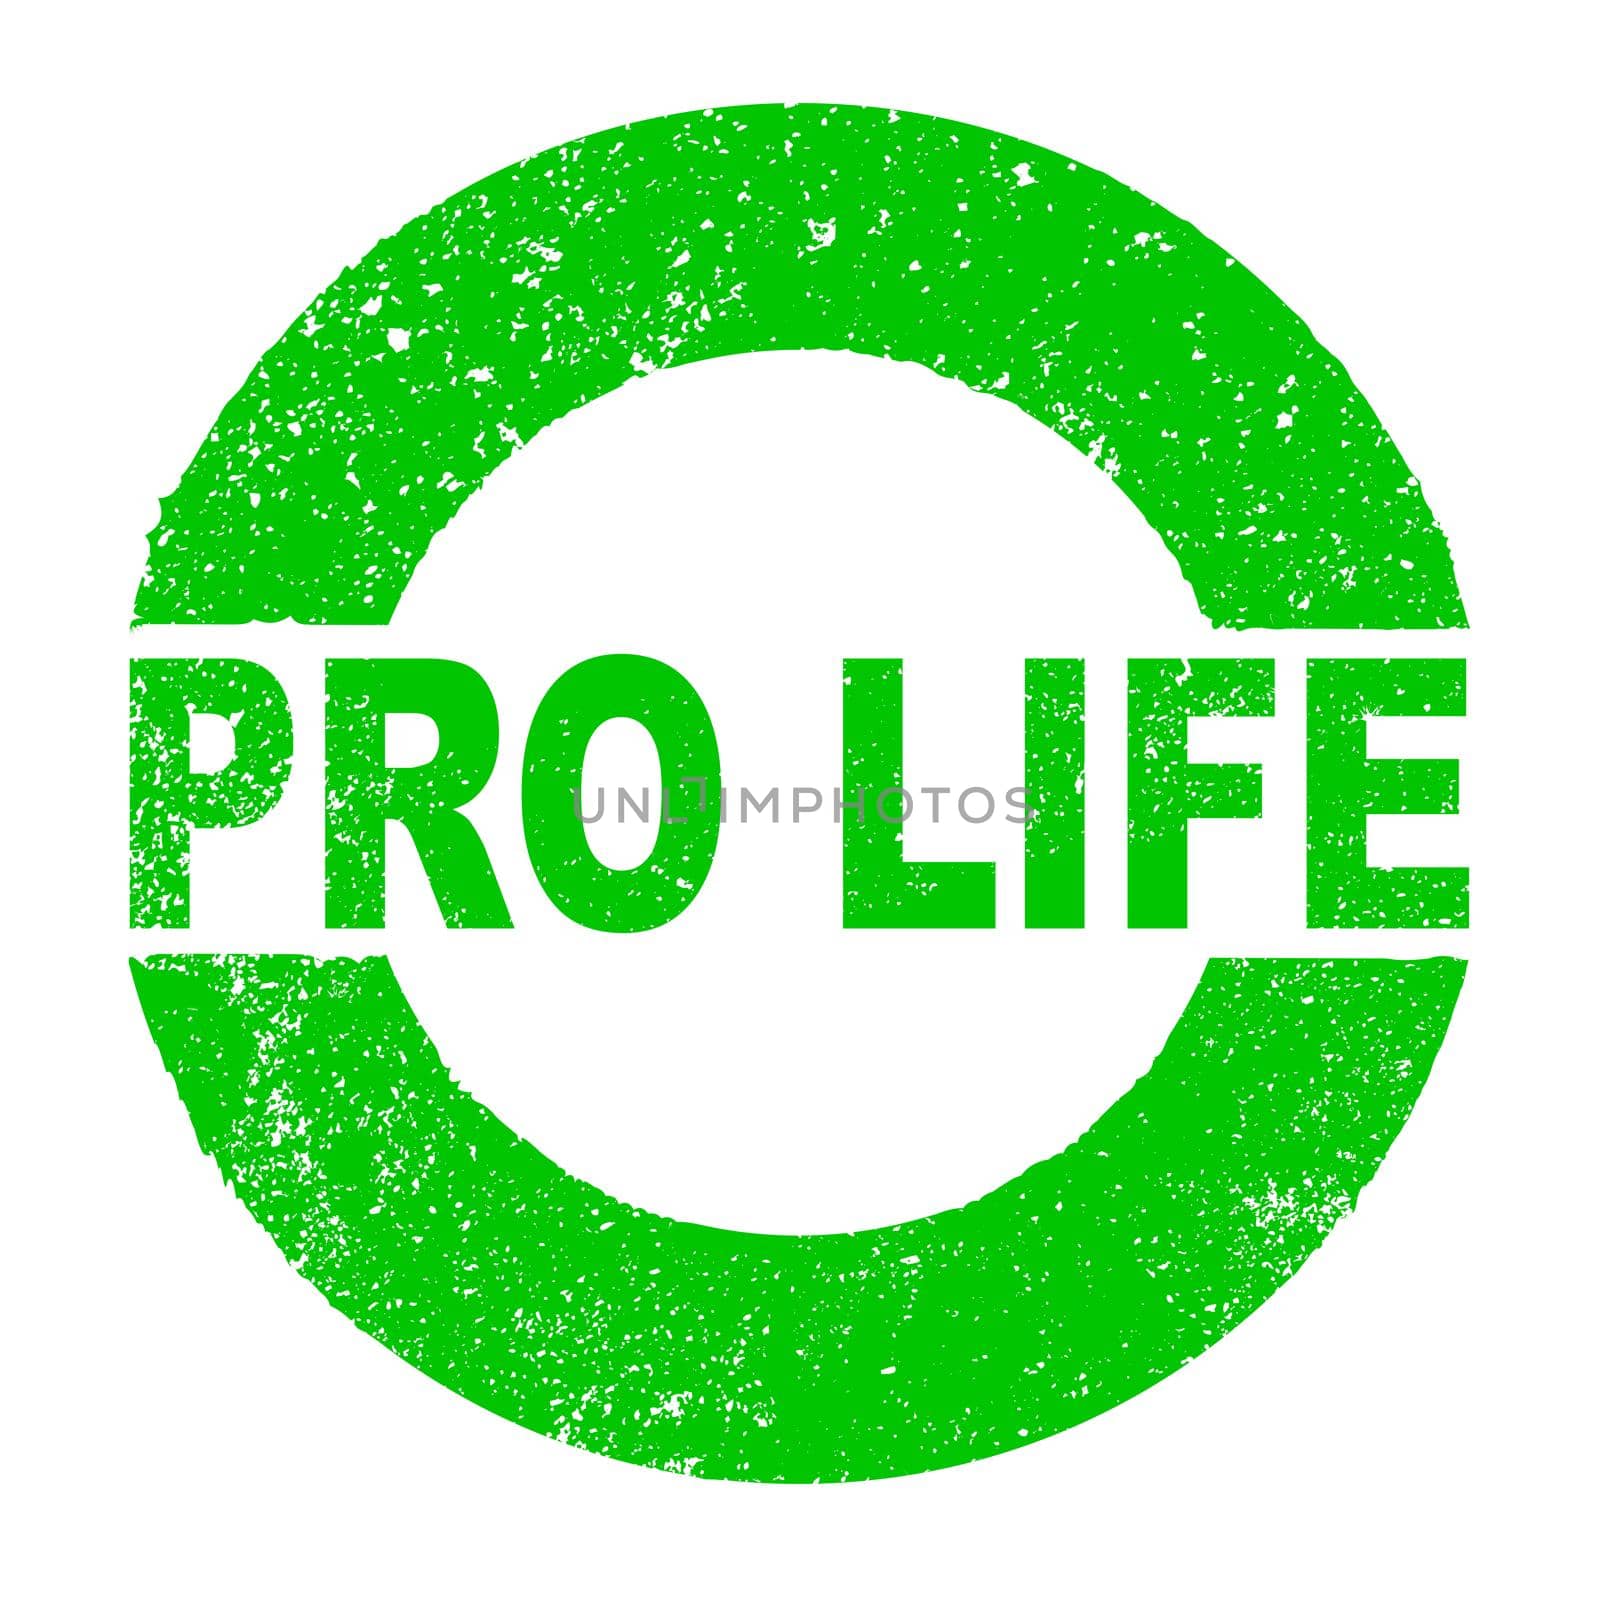 A green grunge rubber ink stamp with the text Pro Life over a white background